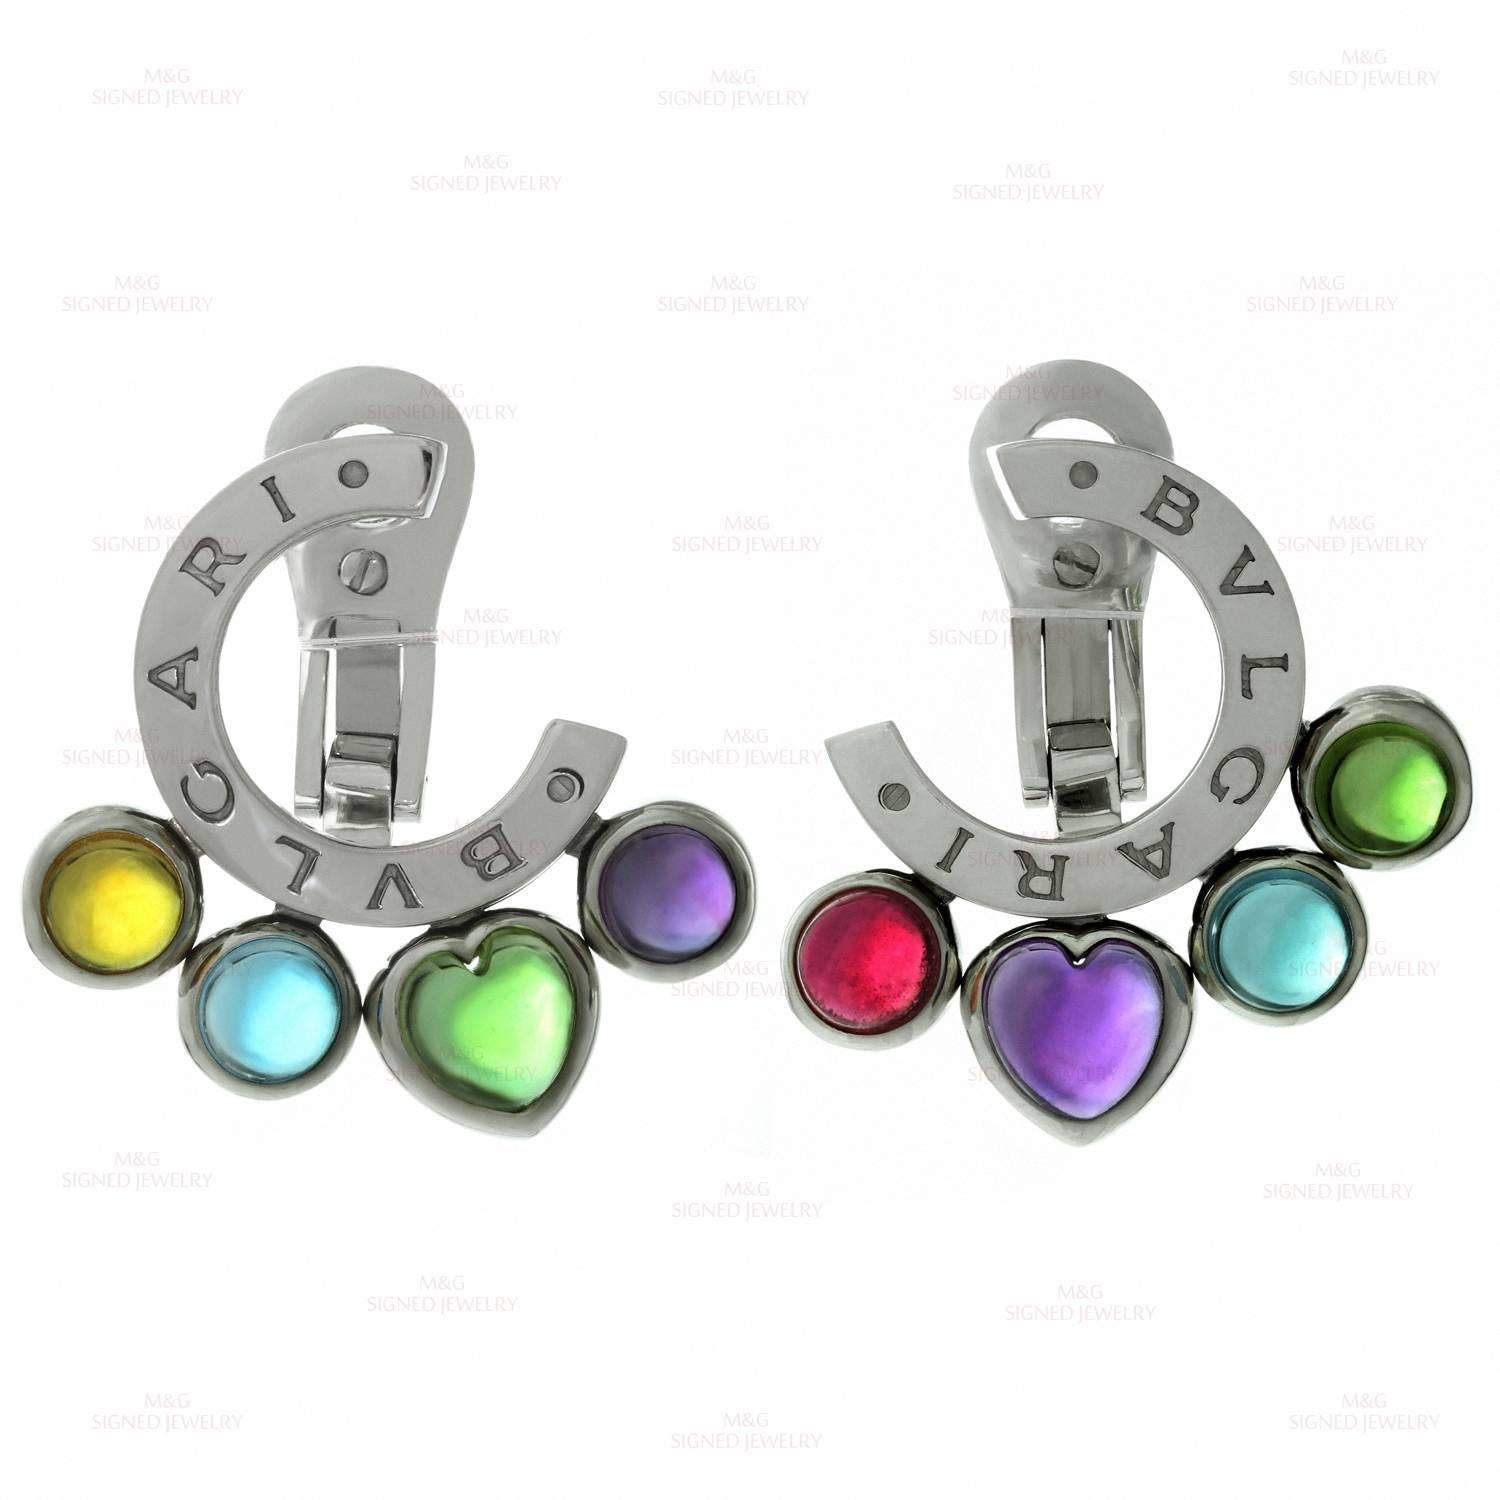 These stunning earrings from Bulgari's Allegra collection are crafted in 18k white gold and set with a vibrant array of cabochon gemstones - green peridot, pink tourmaline, amethyst, citrine  & blue topaz. Made in France circa 2010s.